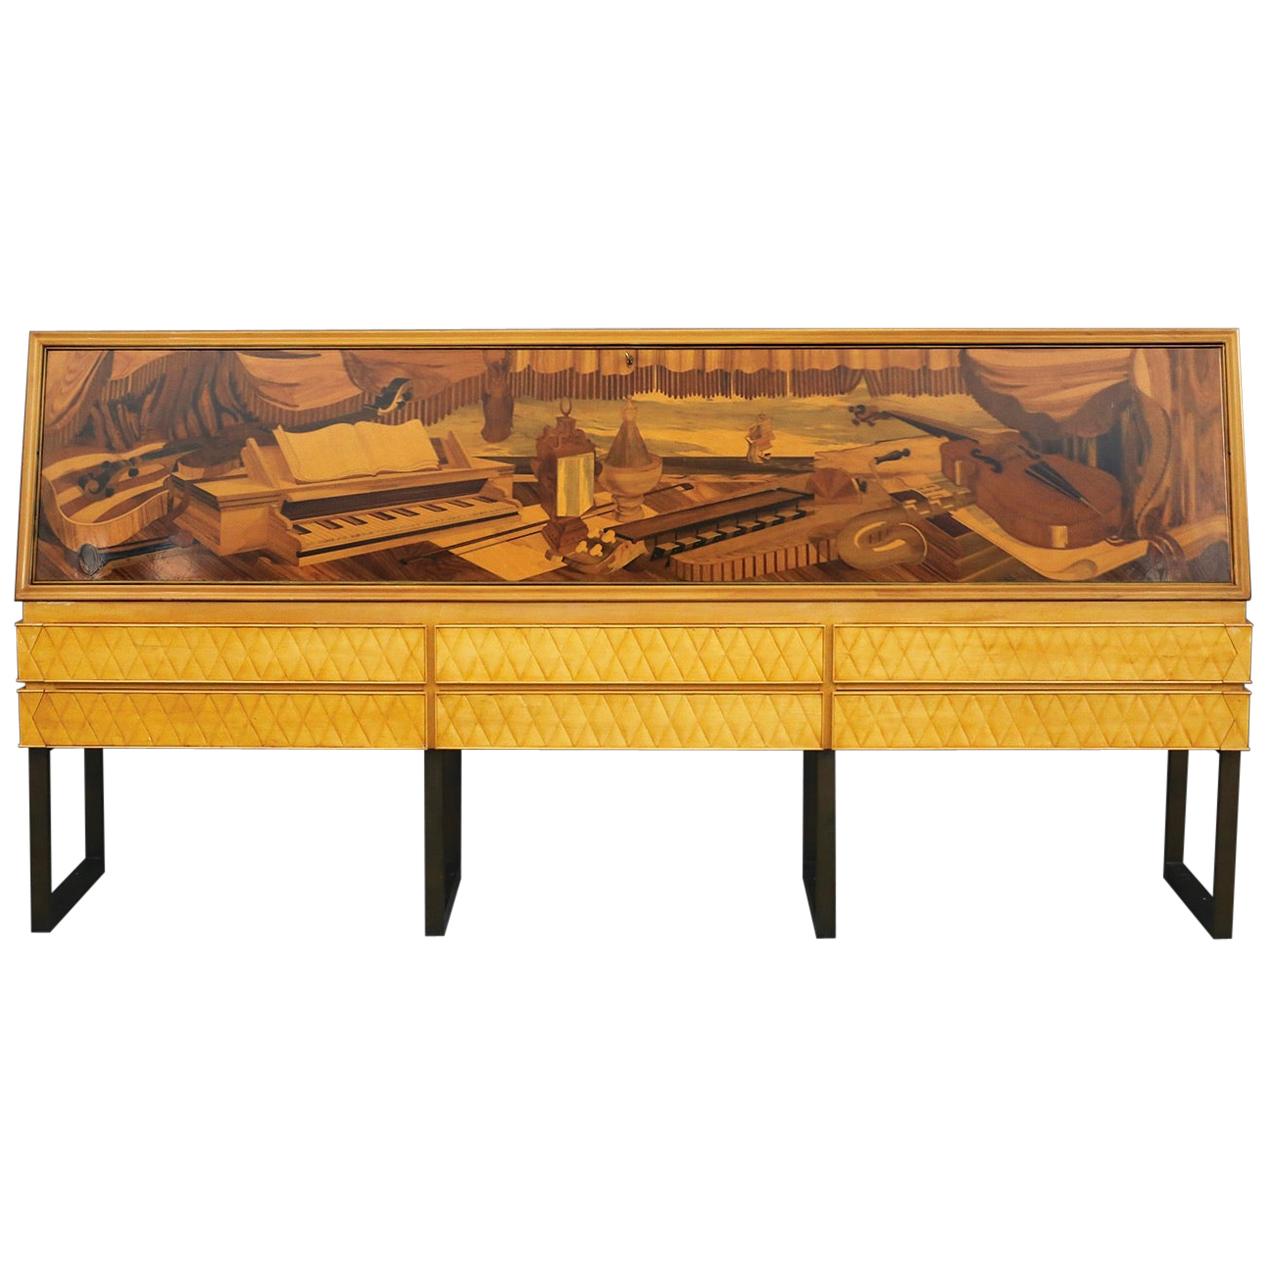 Italian Midcentury Sideboard by Antonio Cassi Ramelli and L. Anzani Signed 1950s